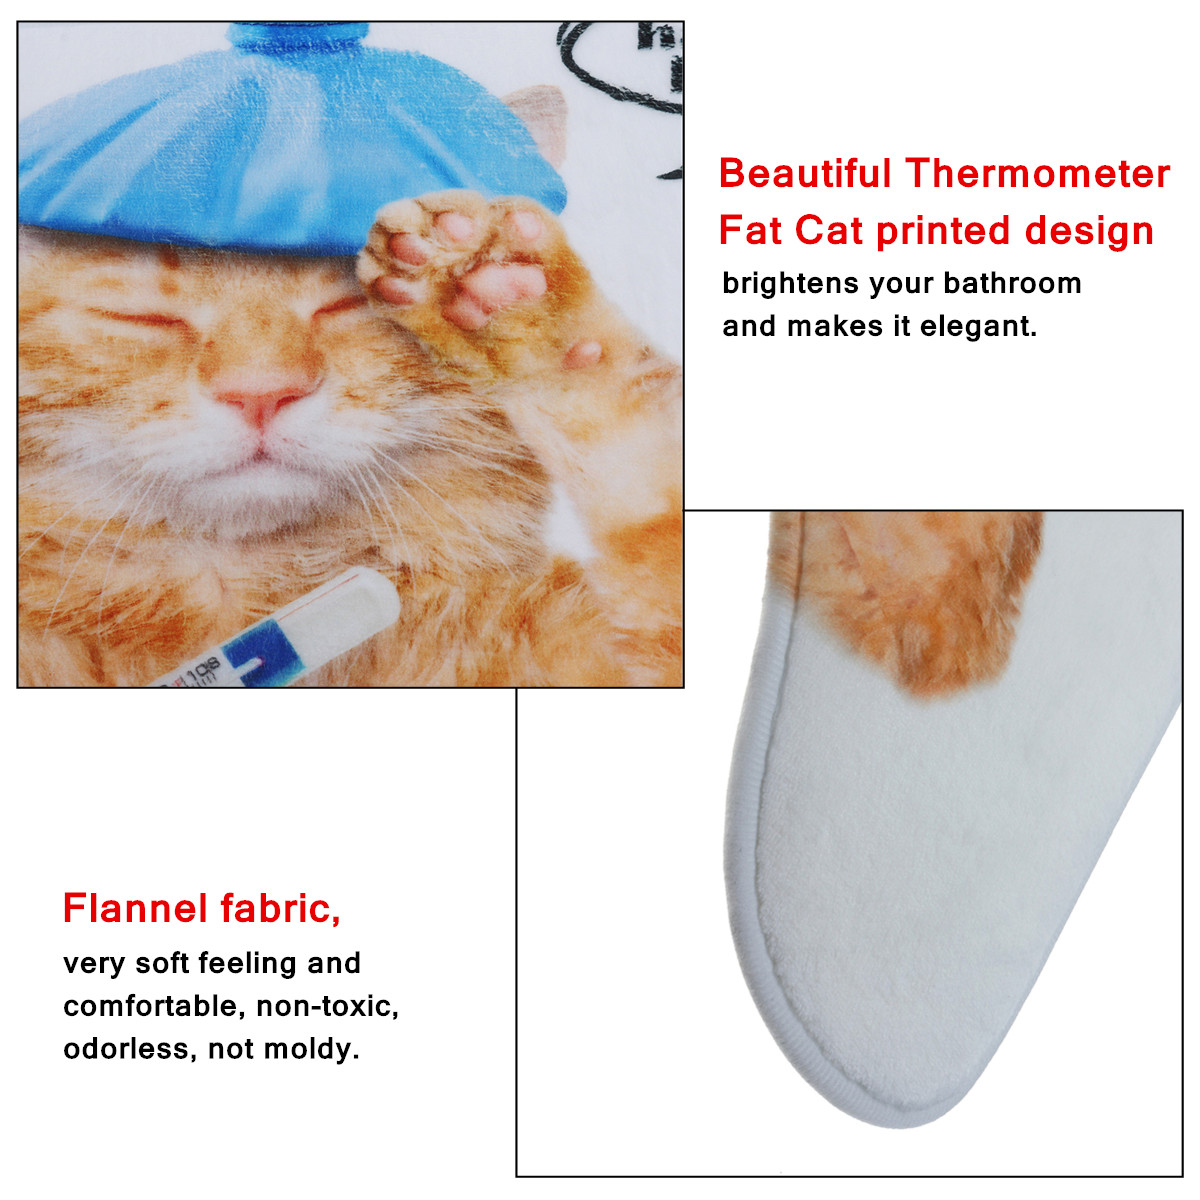 Toilet-Seat-Covers-Bathroom-Non-Slip-Thermometer-Fat-Cat-Pedestal-Rugs-Lid-Toilet-Covers-Bath-Mats-1411646-5